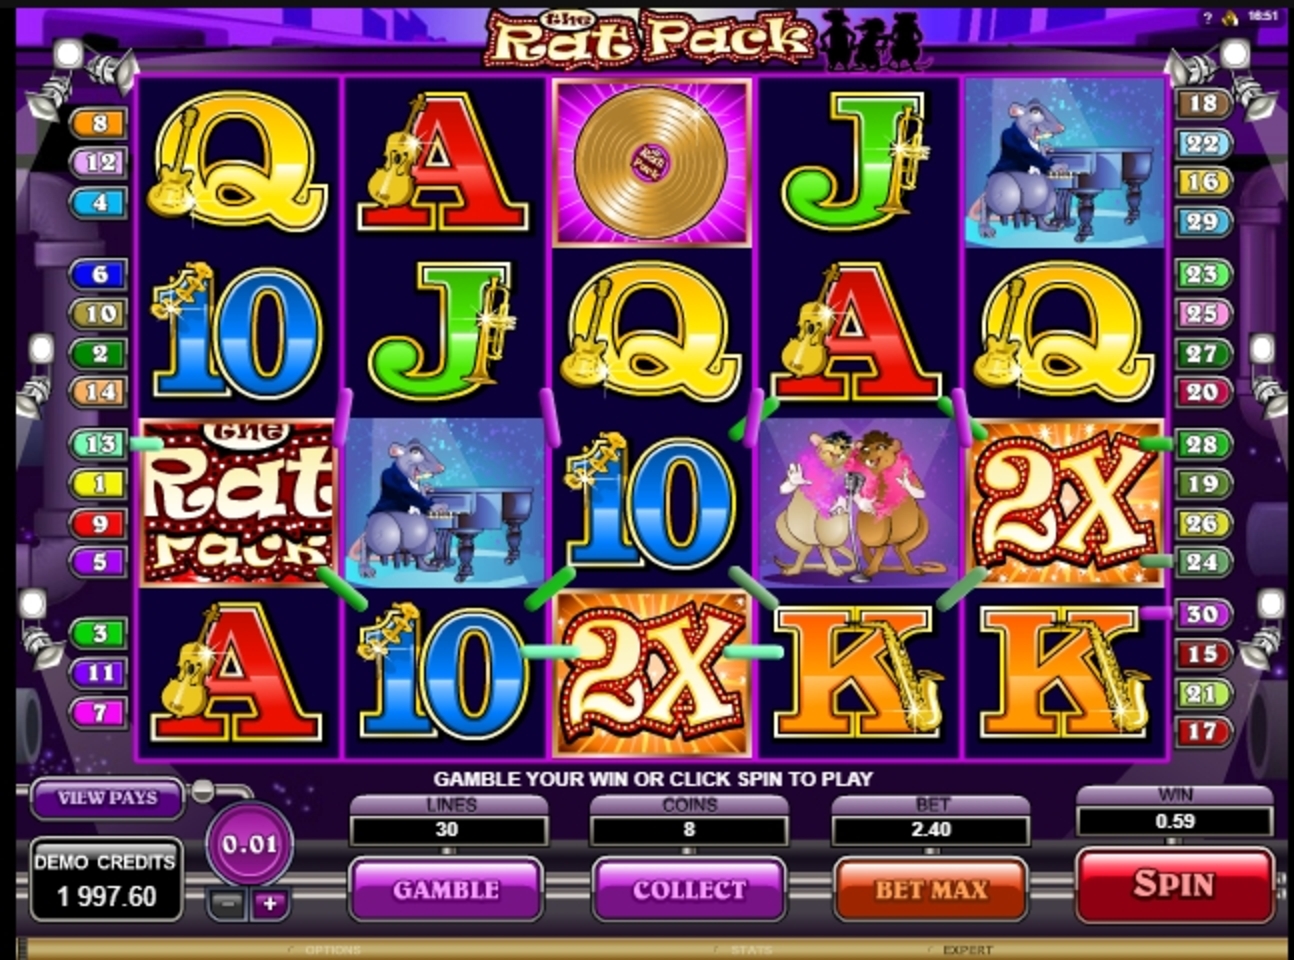 Win Money in The Rat Pack Free Slot Game by Microgaming